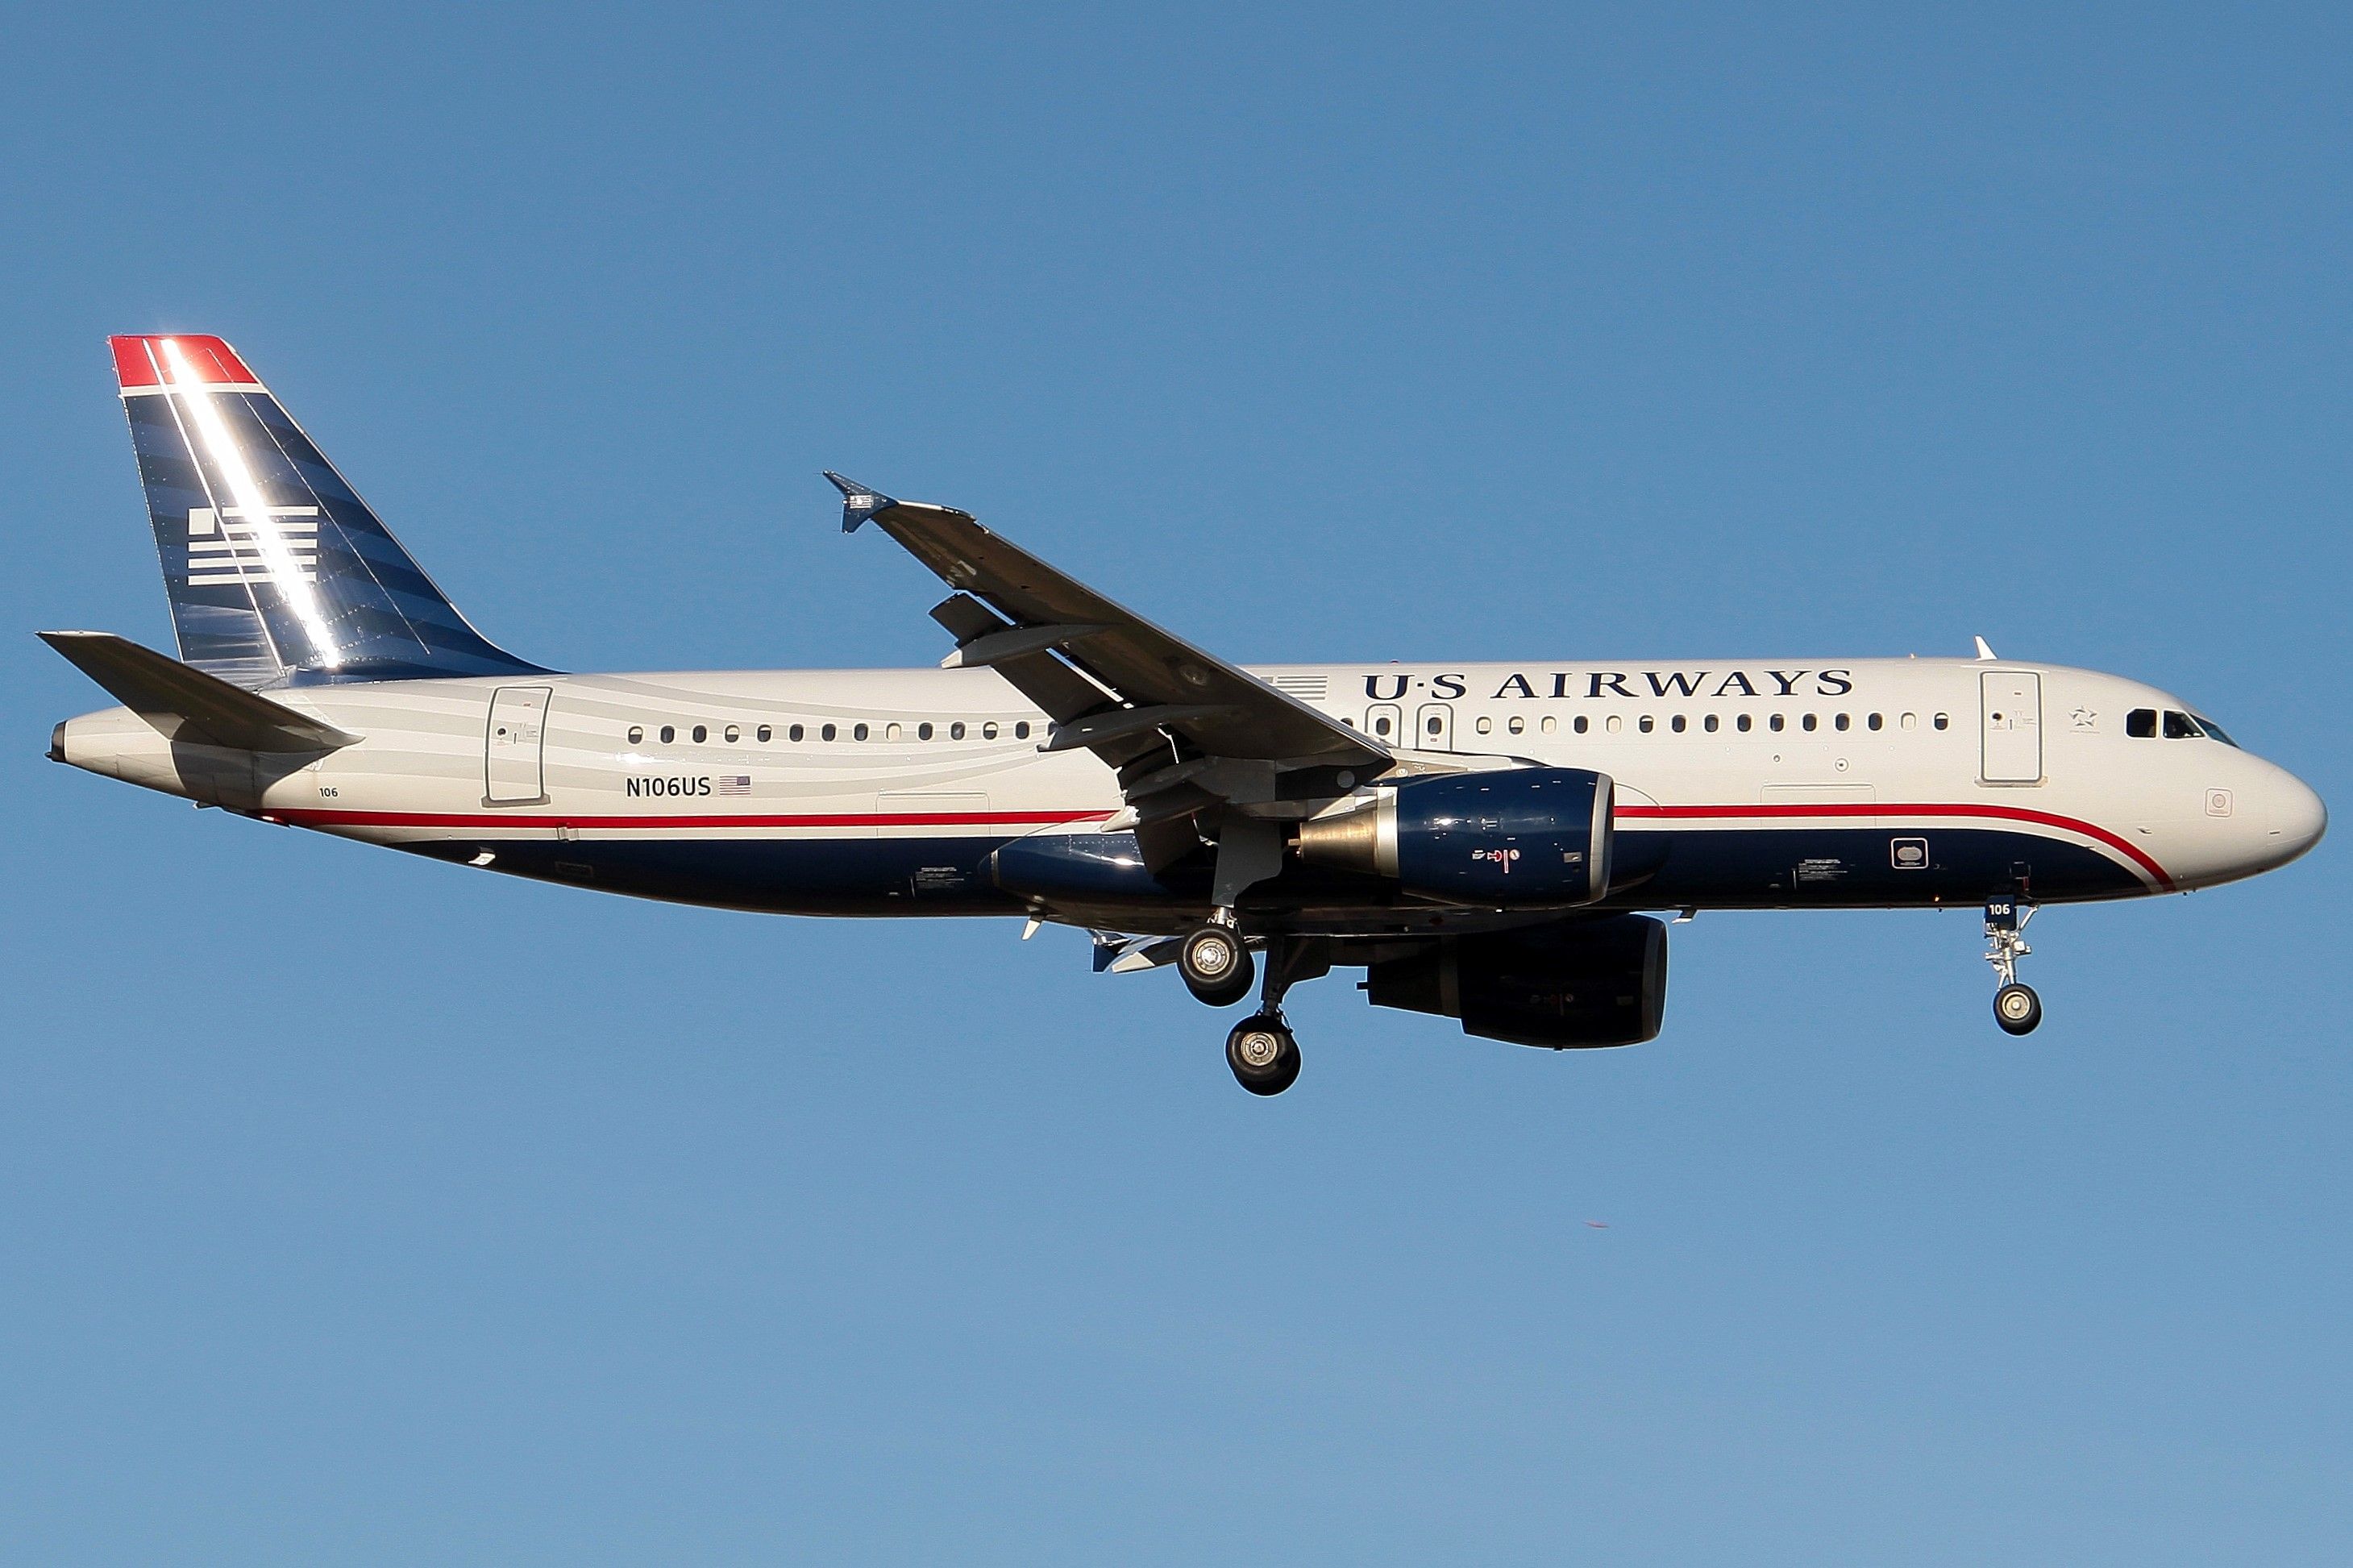 A US Airways Airbus A320 flying in the sky.